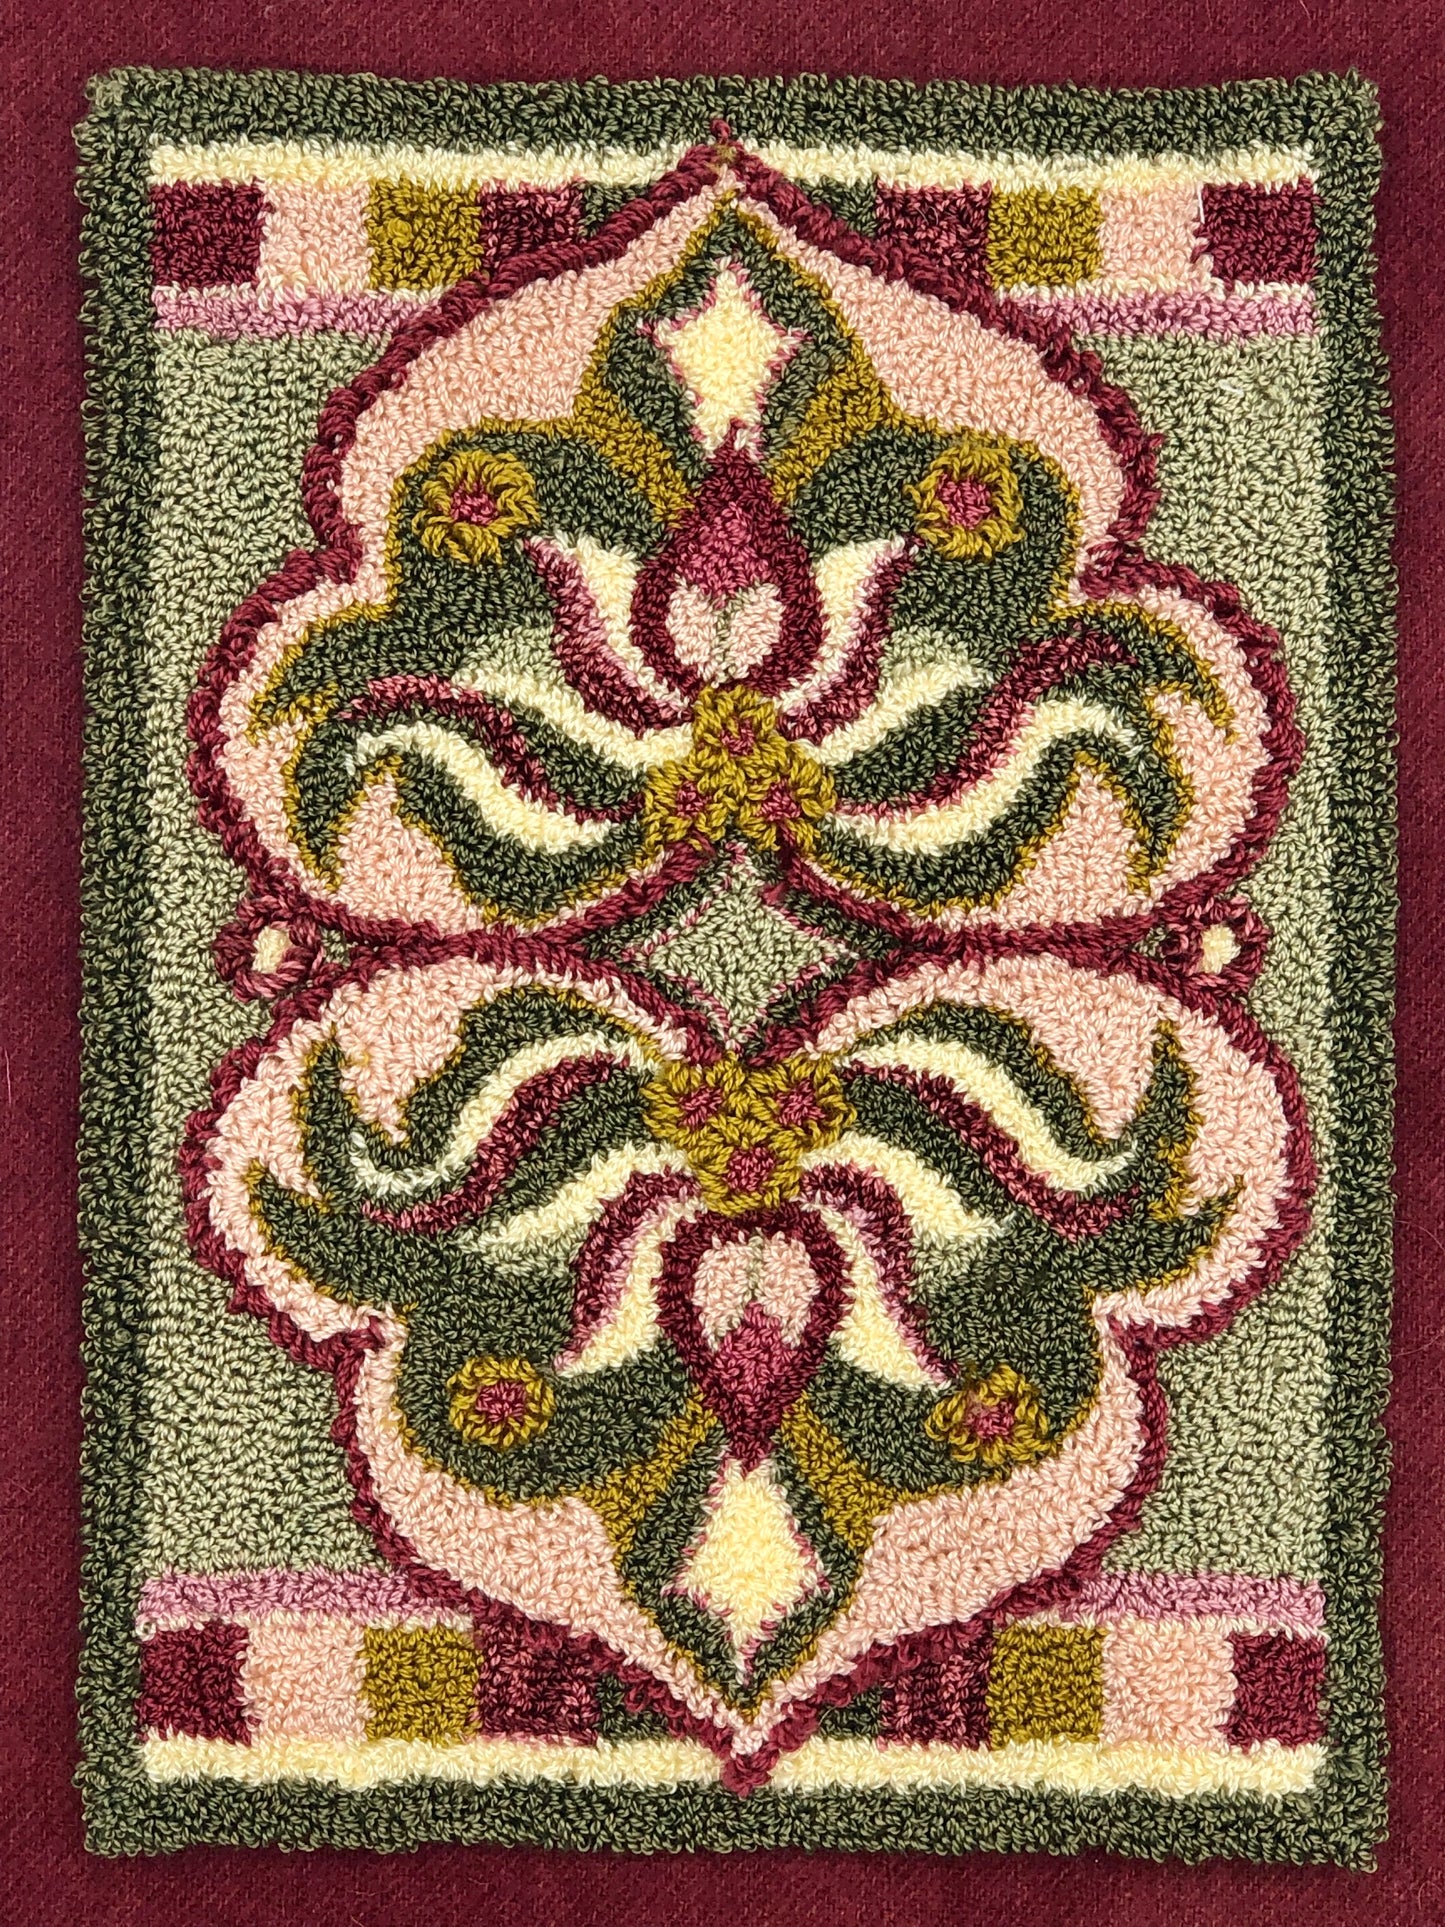 Reflected- Rug Hooking or Rug Punch Needle Pattern on Linen by Orphaned Wool. This lovely pattern is Hand-drawn on natural linen and makes a wonderful tabletop runner. Comes with two color guides (Summer & Winter)